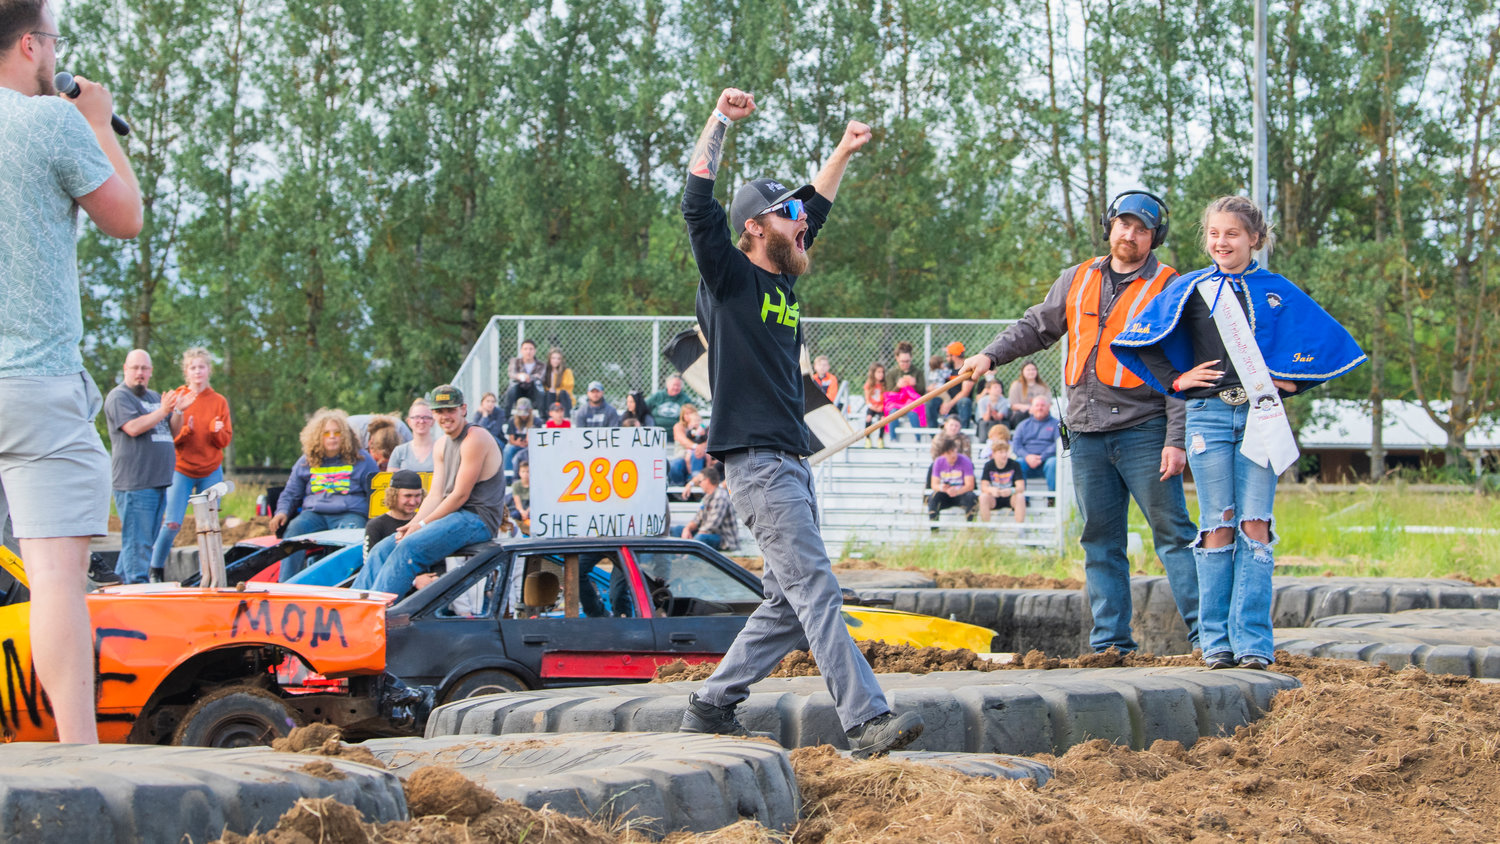 Brad Hunter, cheers as his vehicle wins “prettiest car,” during the Summerfest Demolition Derby at the Southwest Washington Fairgrounds Sunday in Centralia.